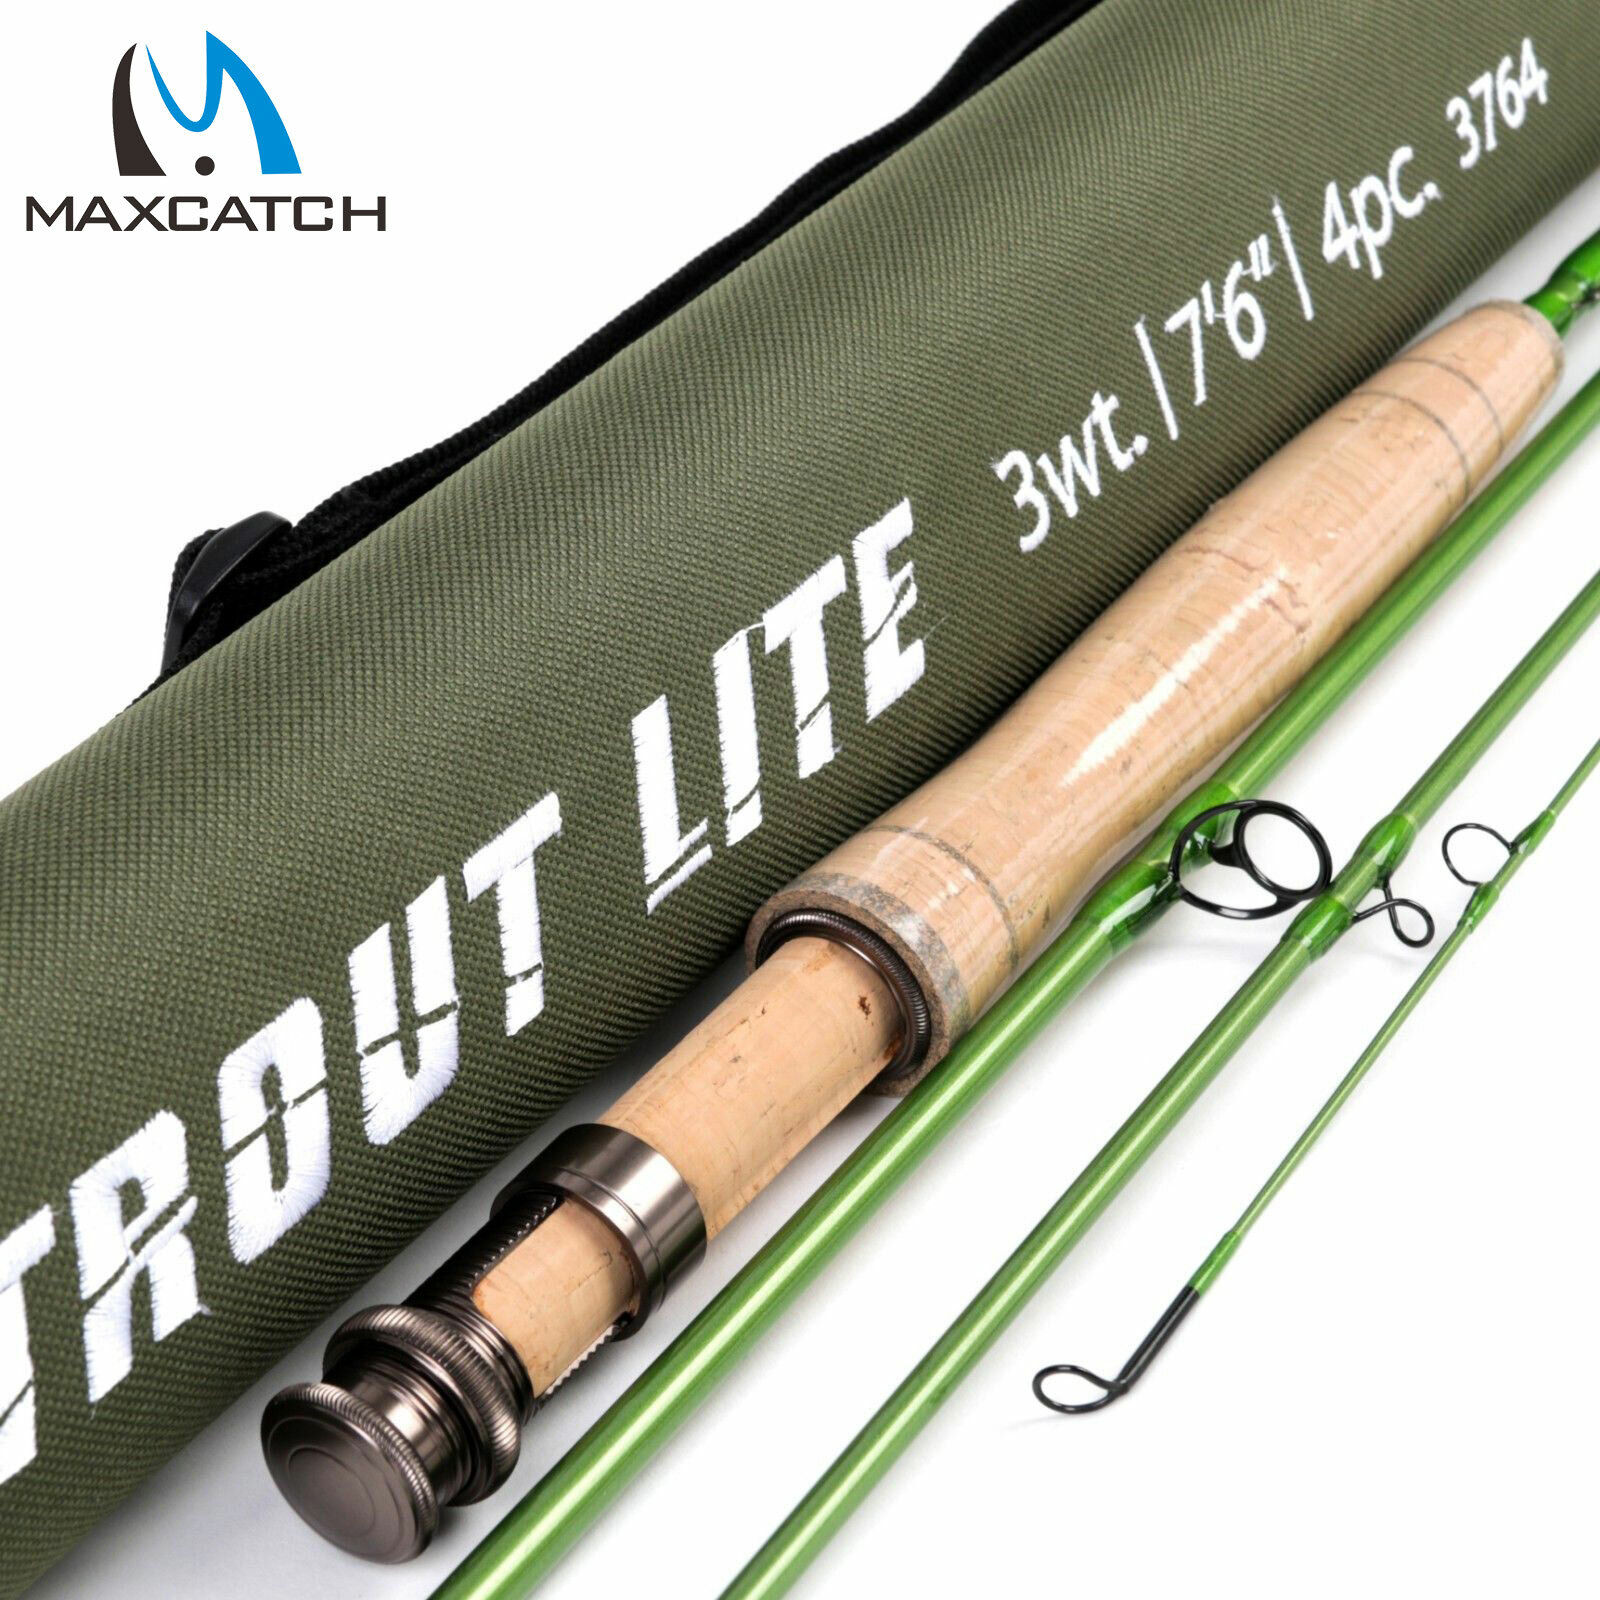 Maxcatch Trout Lite Fly Fishing Rod 3/4/5wt IM12 Carbon For the